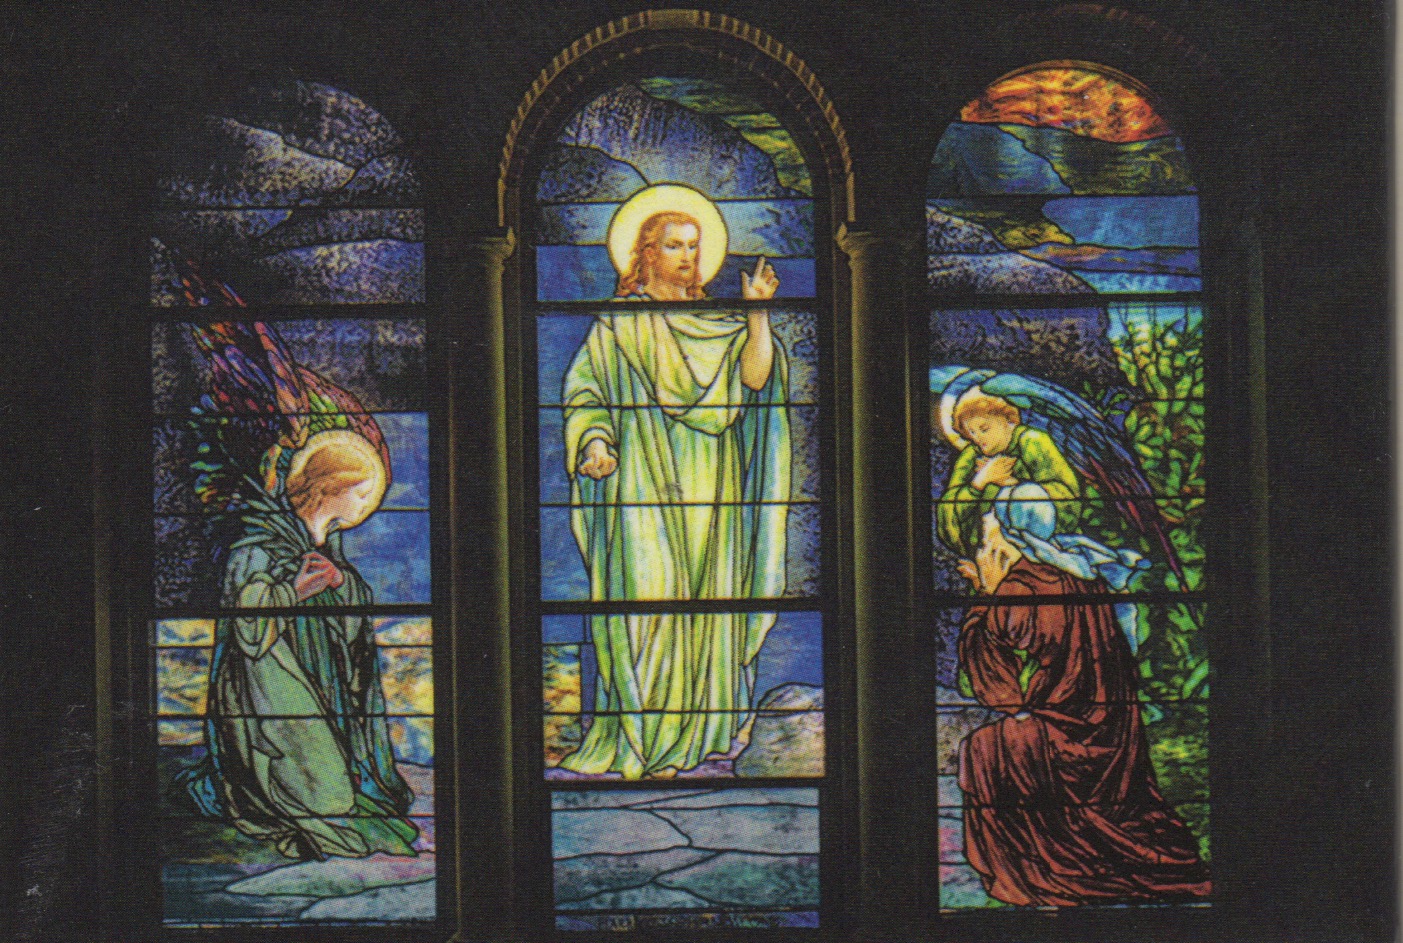 About Louis Comfort Tiffany - Museum Tours